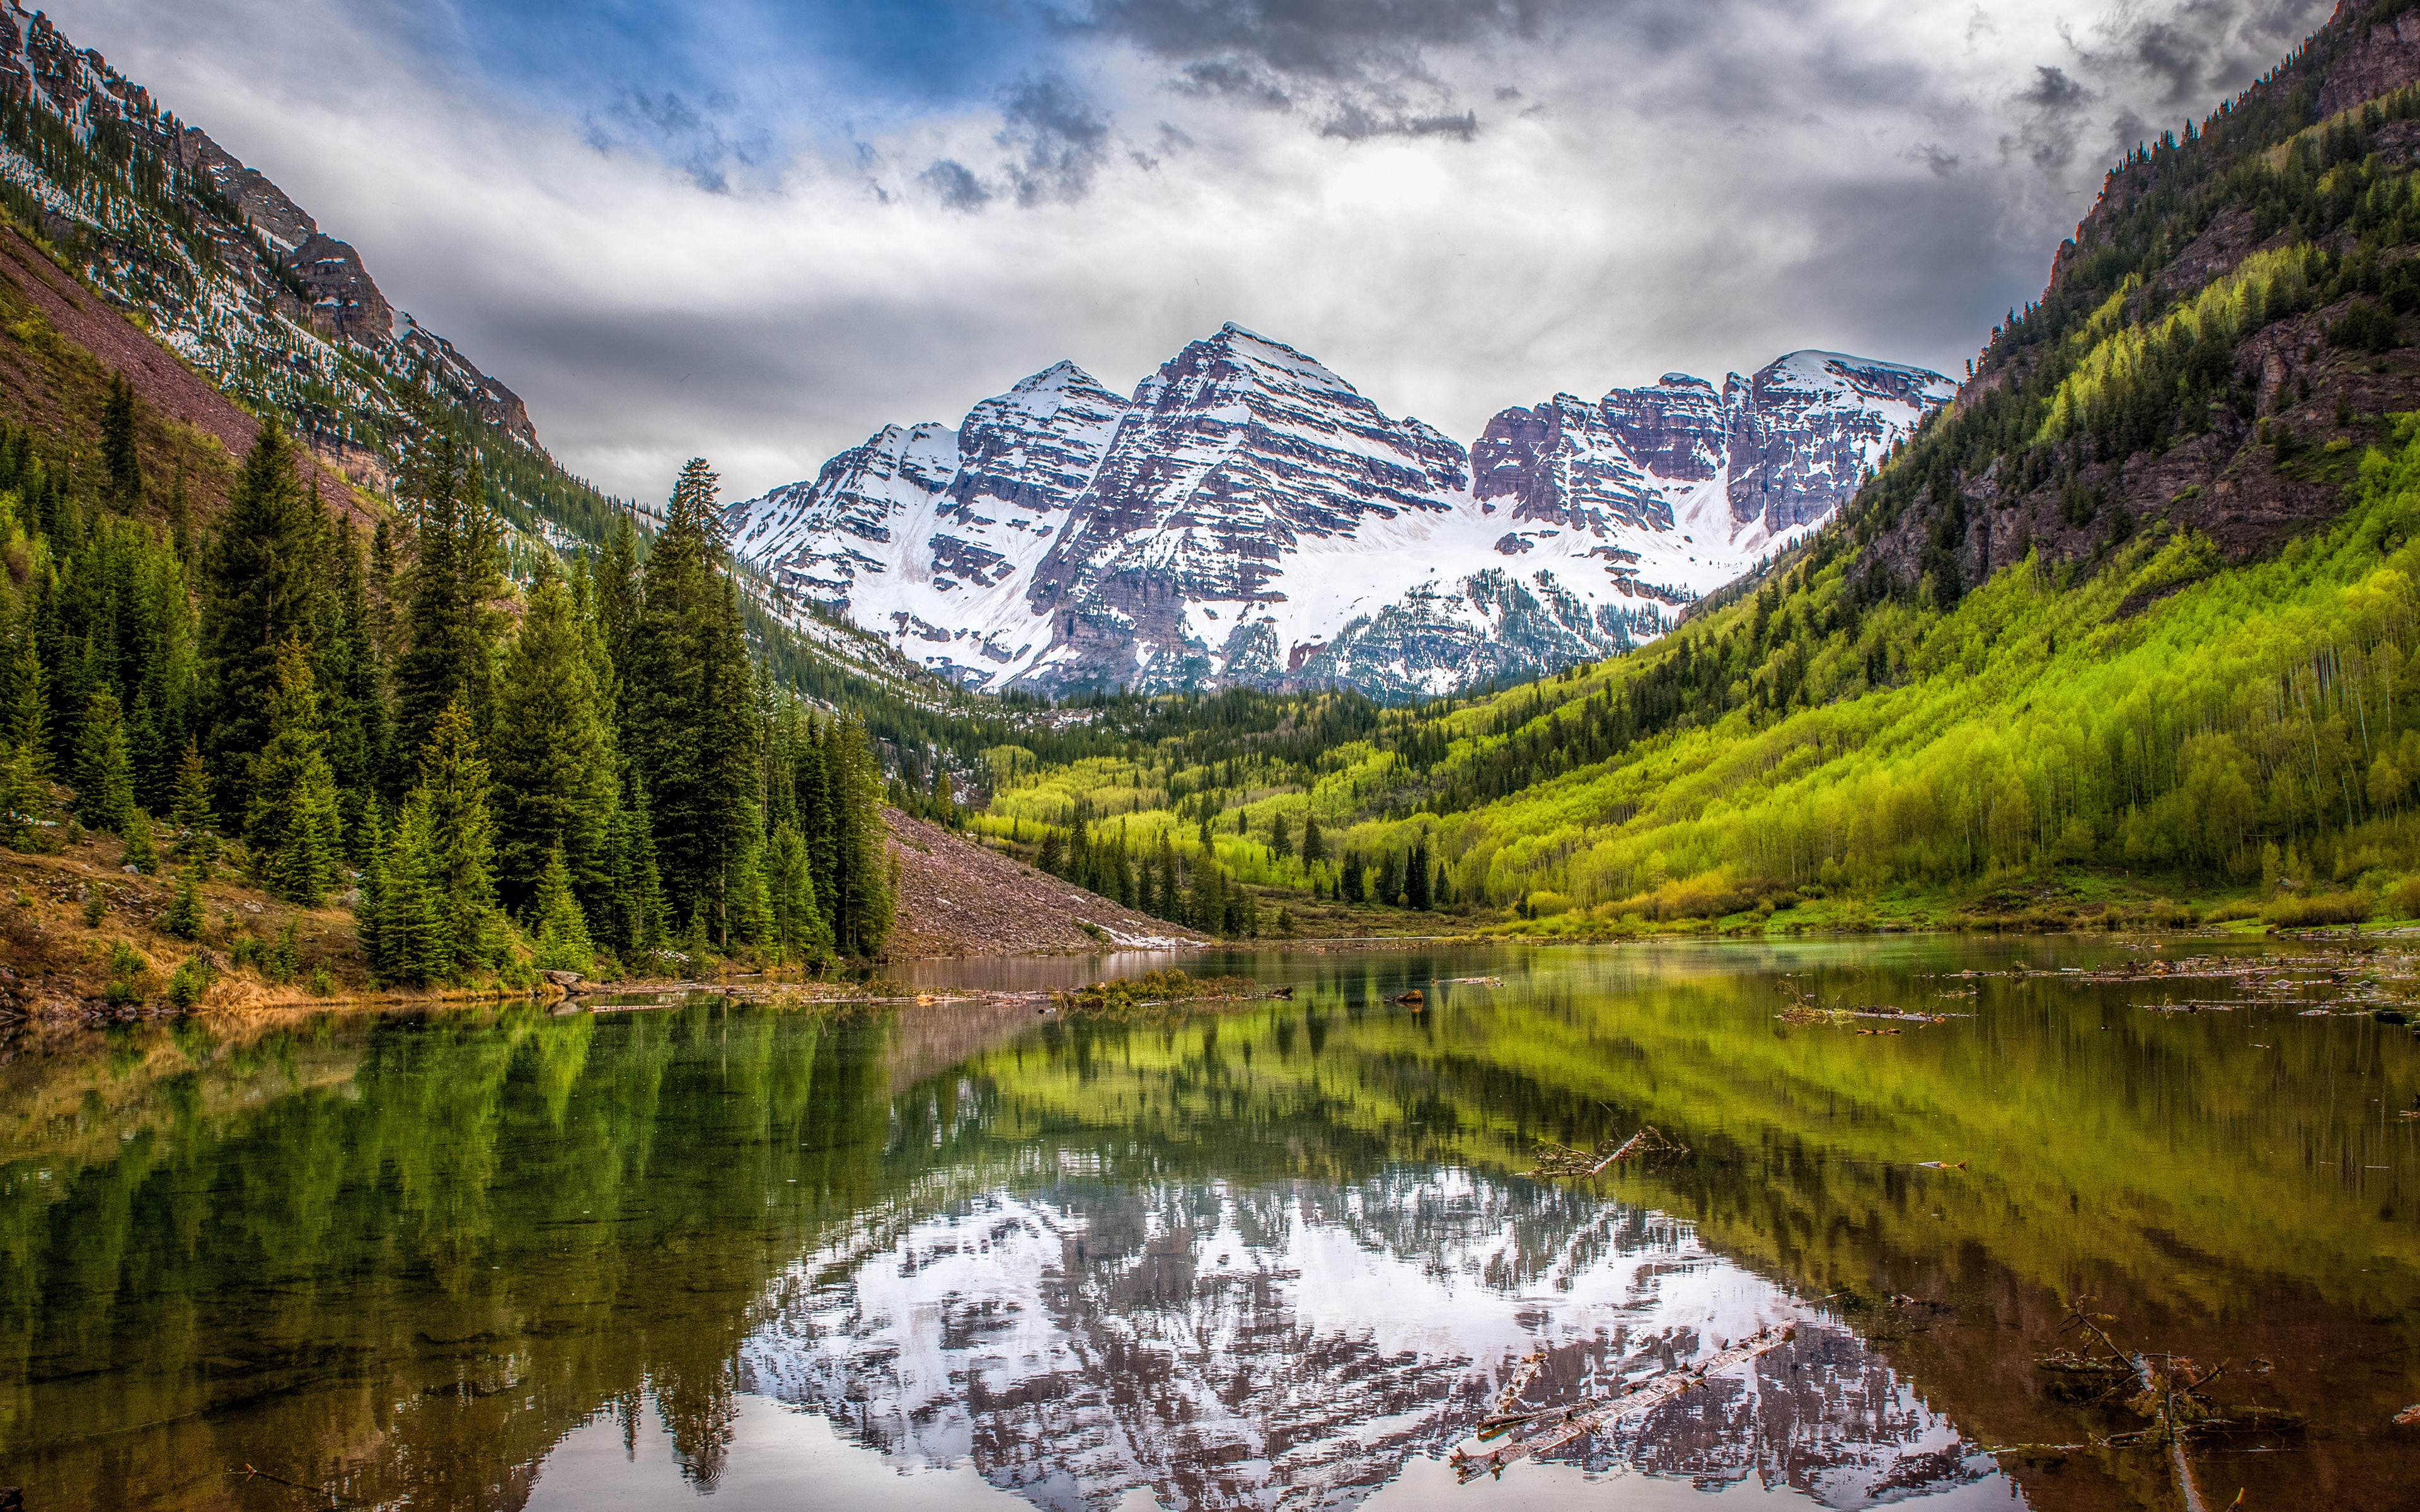 Download wallpaper Maroon Bells, 4k, beautiful nature, mountains, lake, Colorado, USA, America for desktop with resolution 3840x2400. High Quality HD picture wallpaper